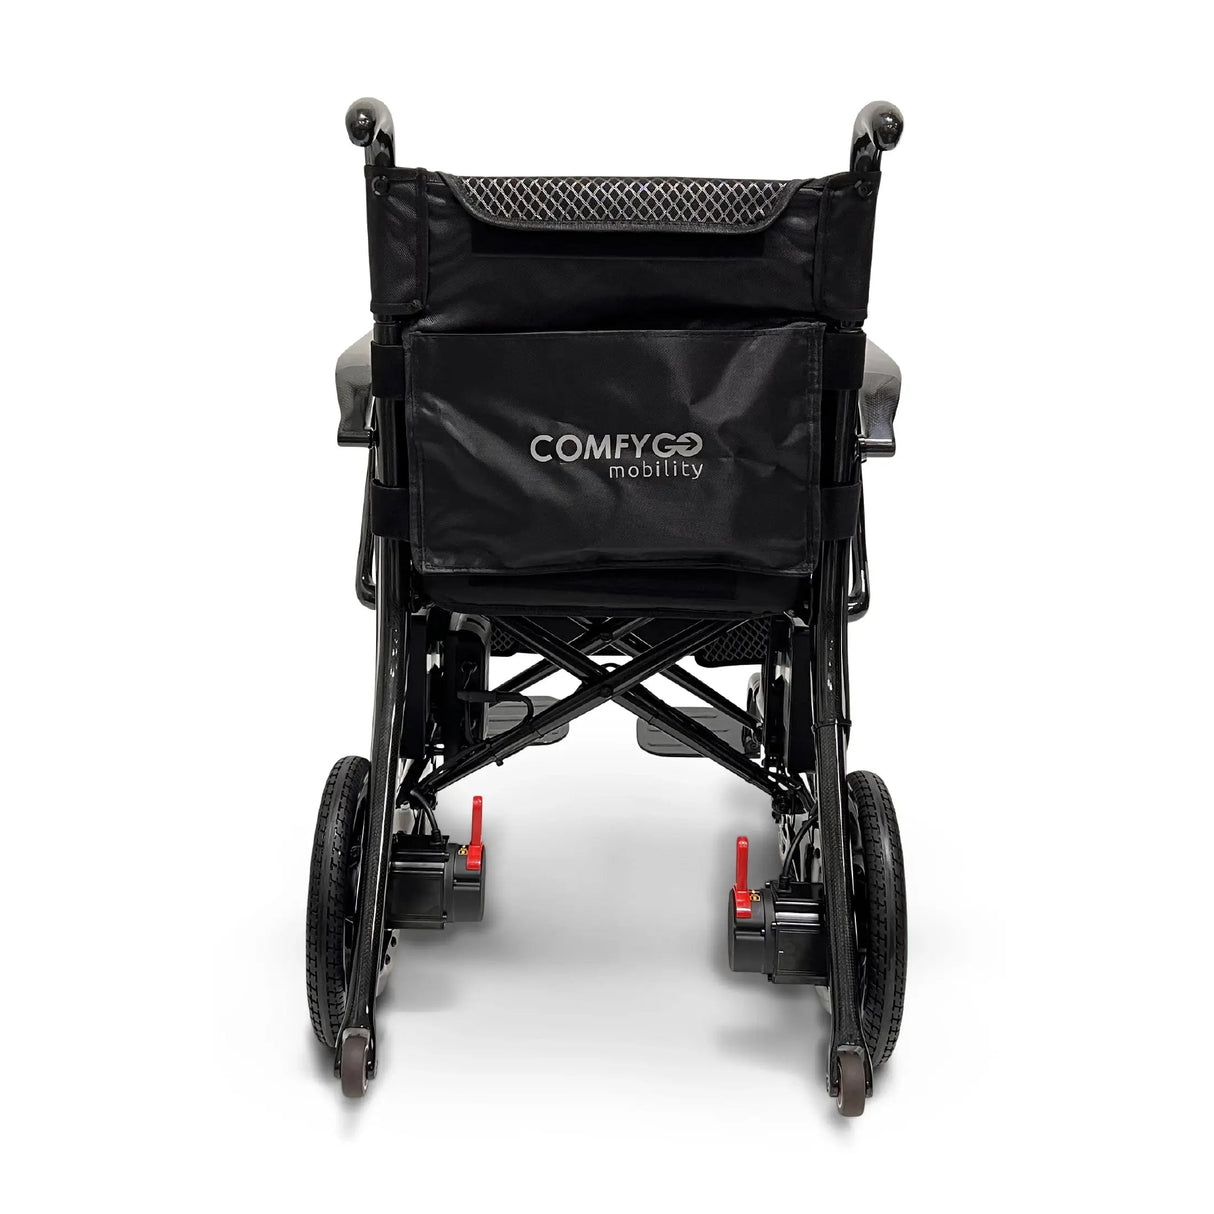 Phoenix Carbon Fiber Electric Wheelchair: Lightweight, Long-Range, Airline Approved